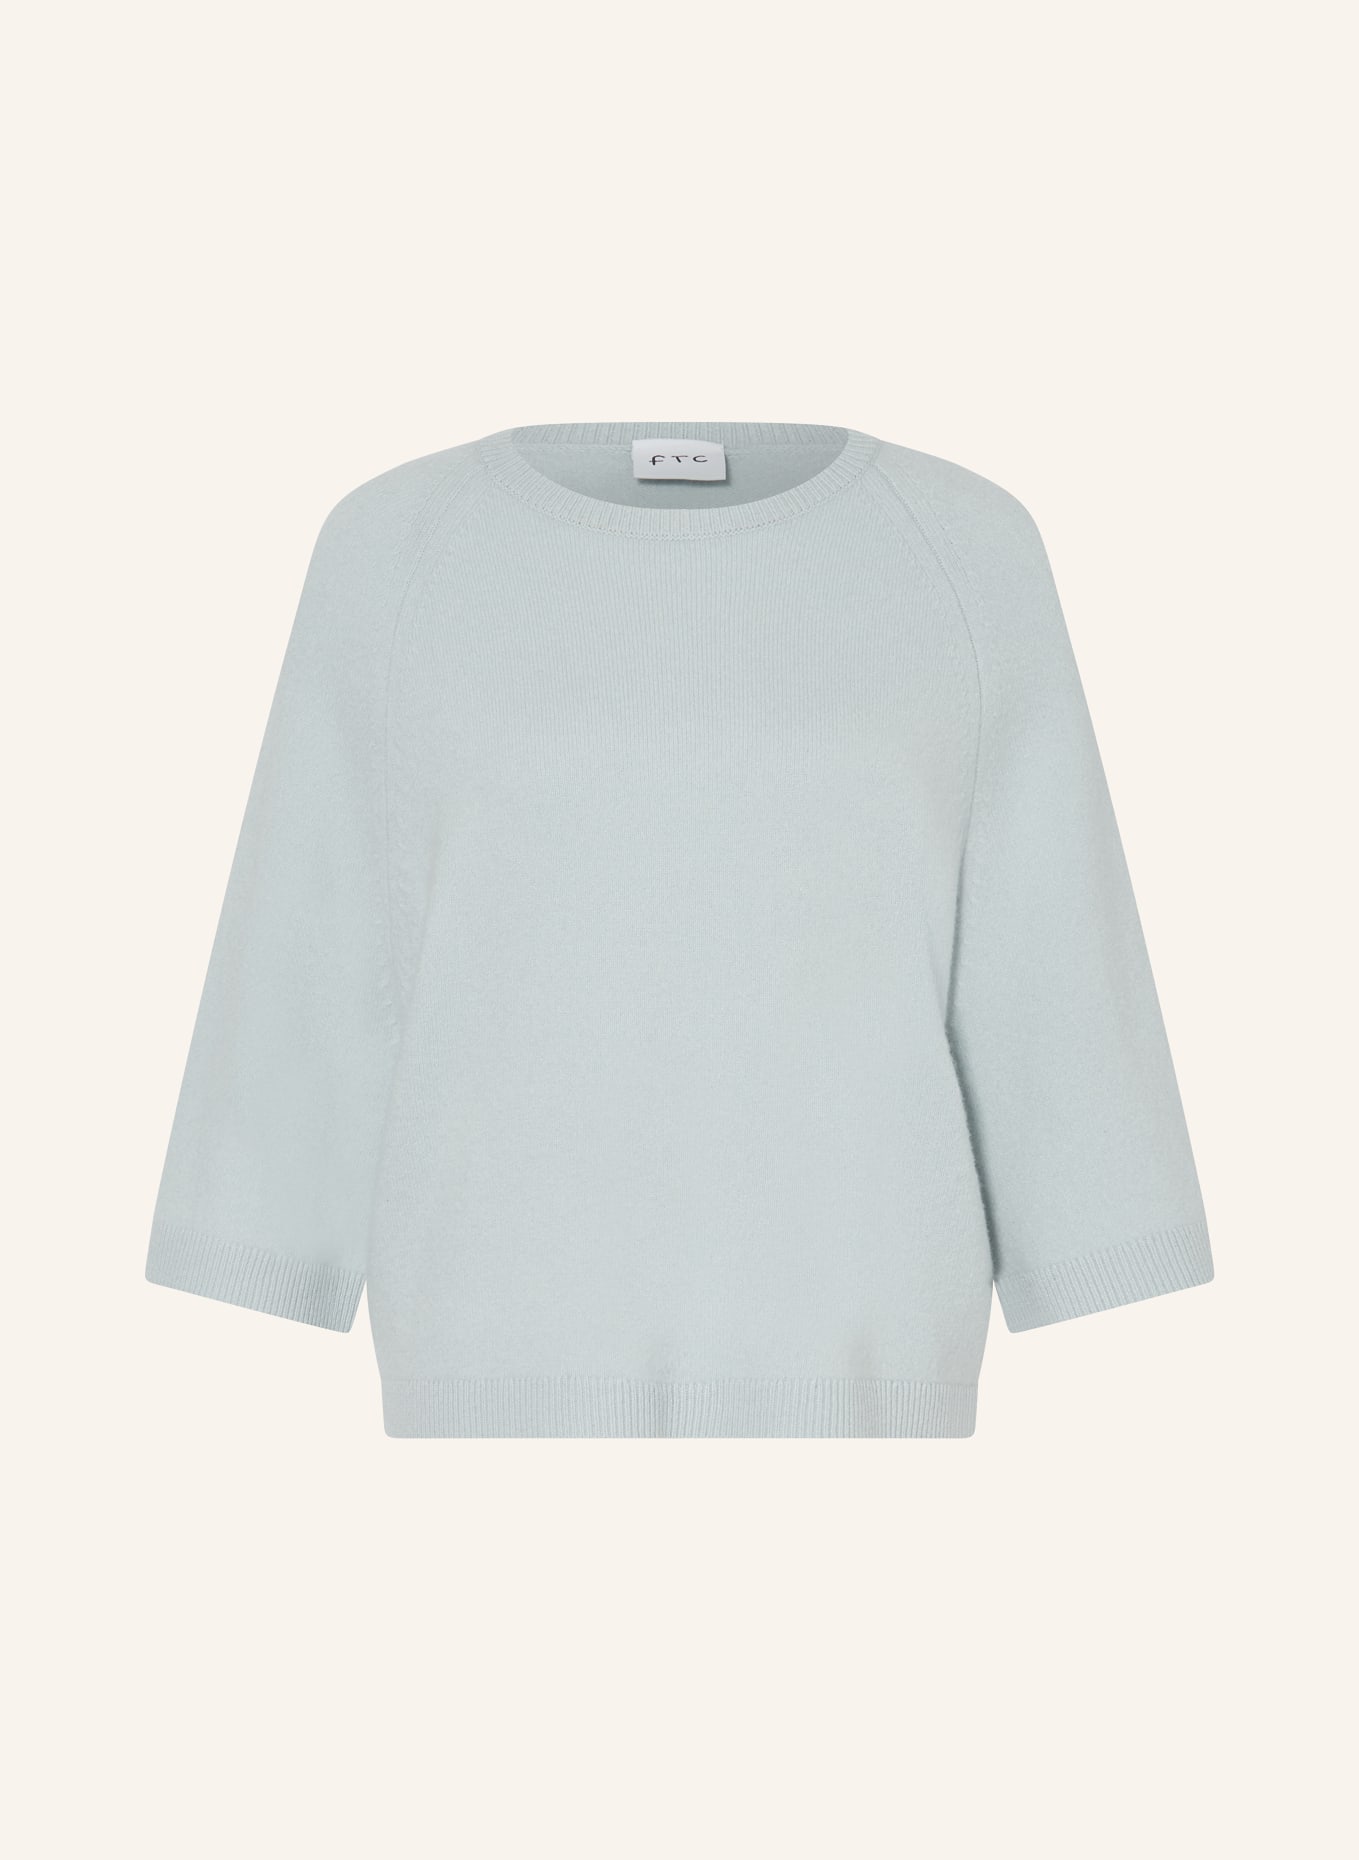 FTC CASHMERE Cashmere sweater with 3/4 sleeves, Color: LIGHT BLUE (Image 1)